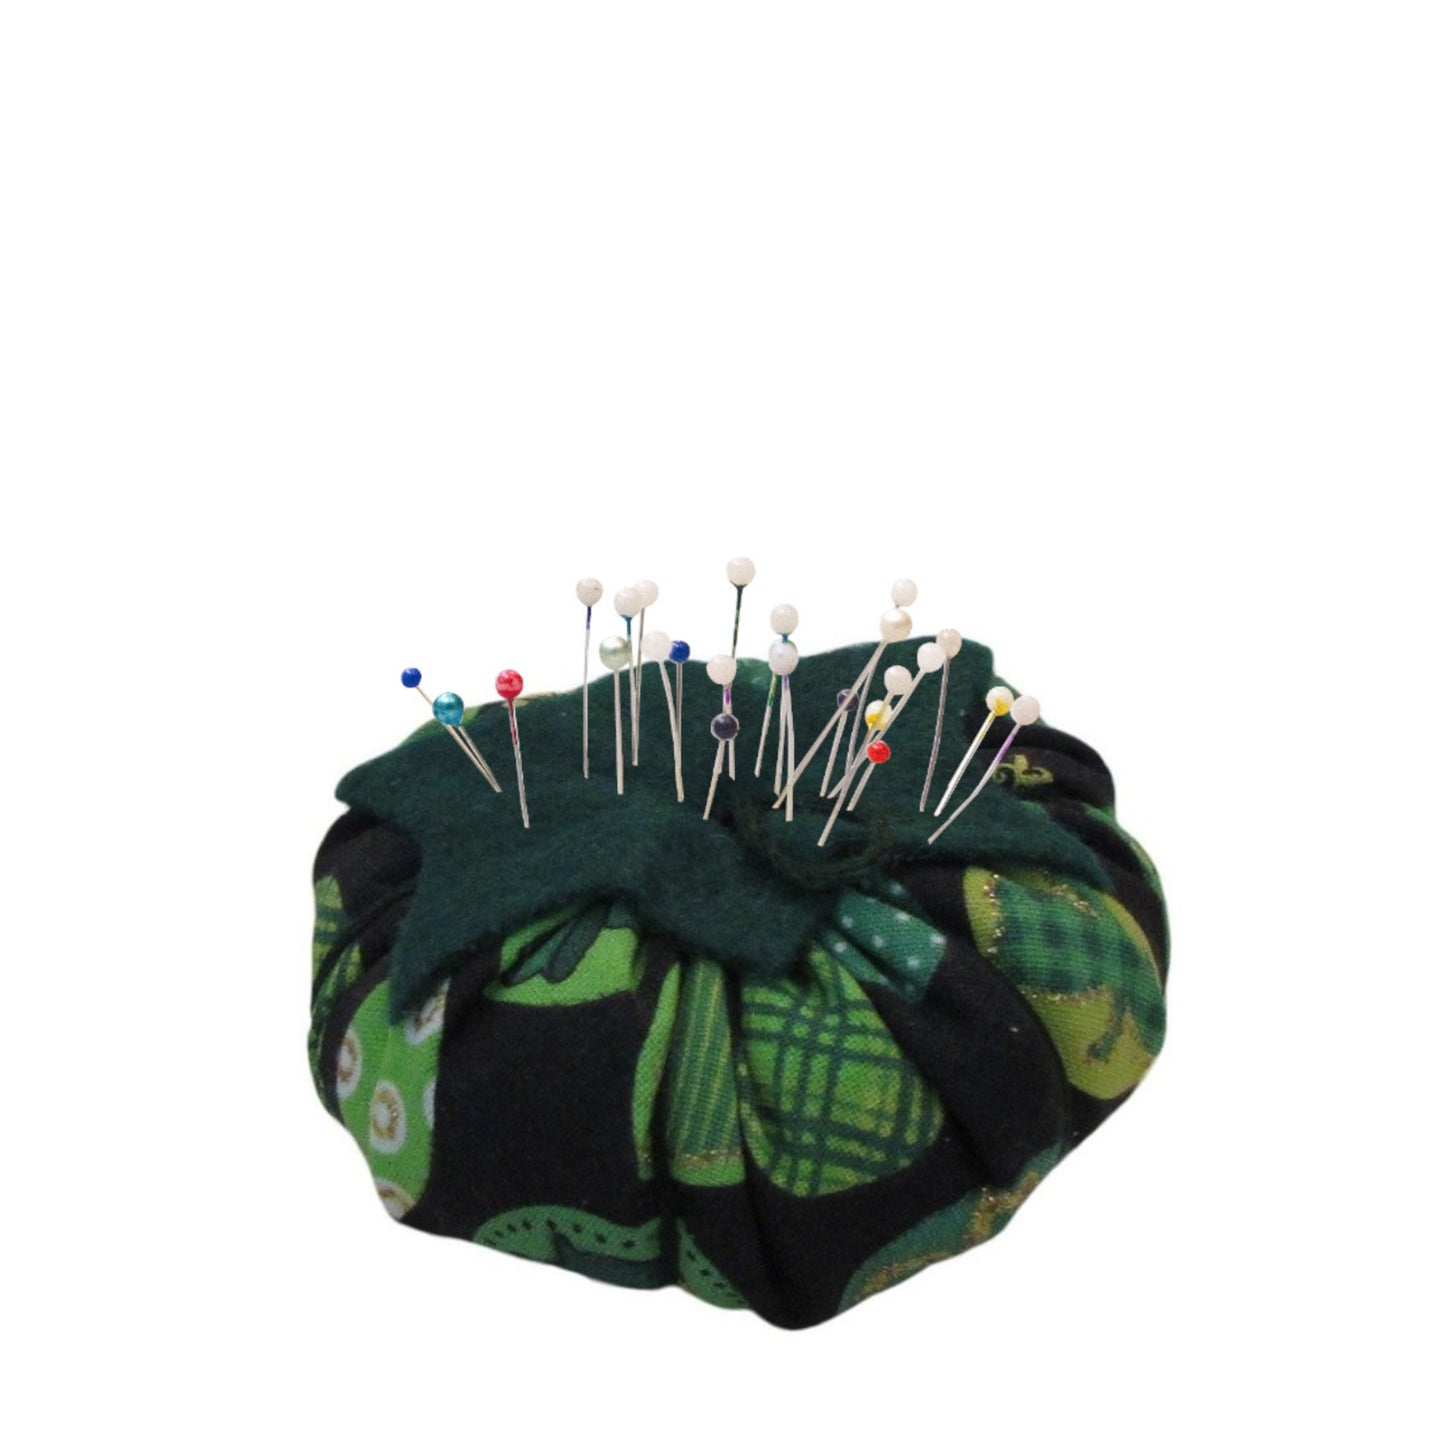 Green Top Clover Print Tomato Pincushion with pins